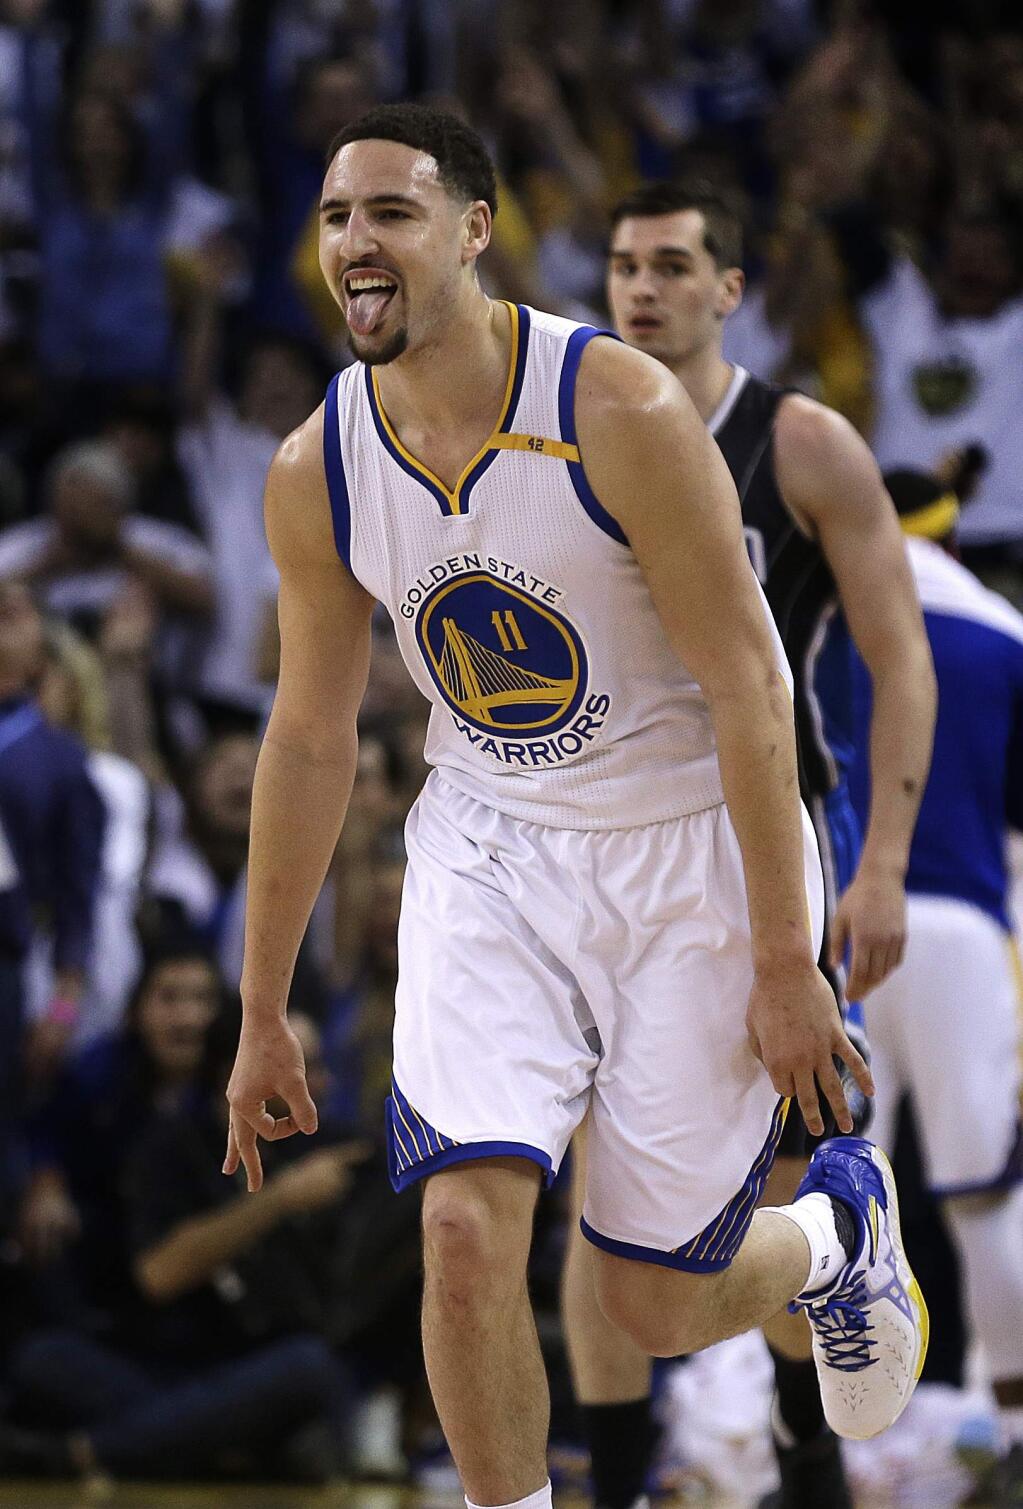 Golden State Warriors' Klay Thompson celebrates a score against the Orlando Magic during the first half of an NBA basketball game Thursday, March 16, 2017, in Oakland, Calif. (AP Photo/Ben Margot)